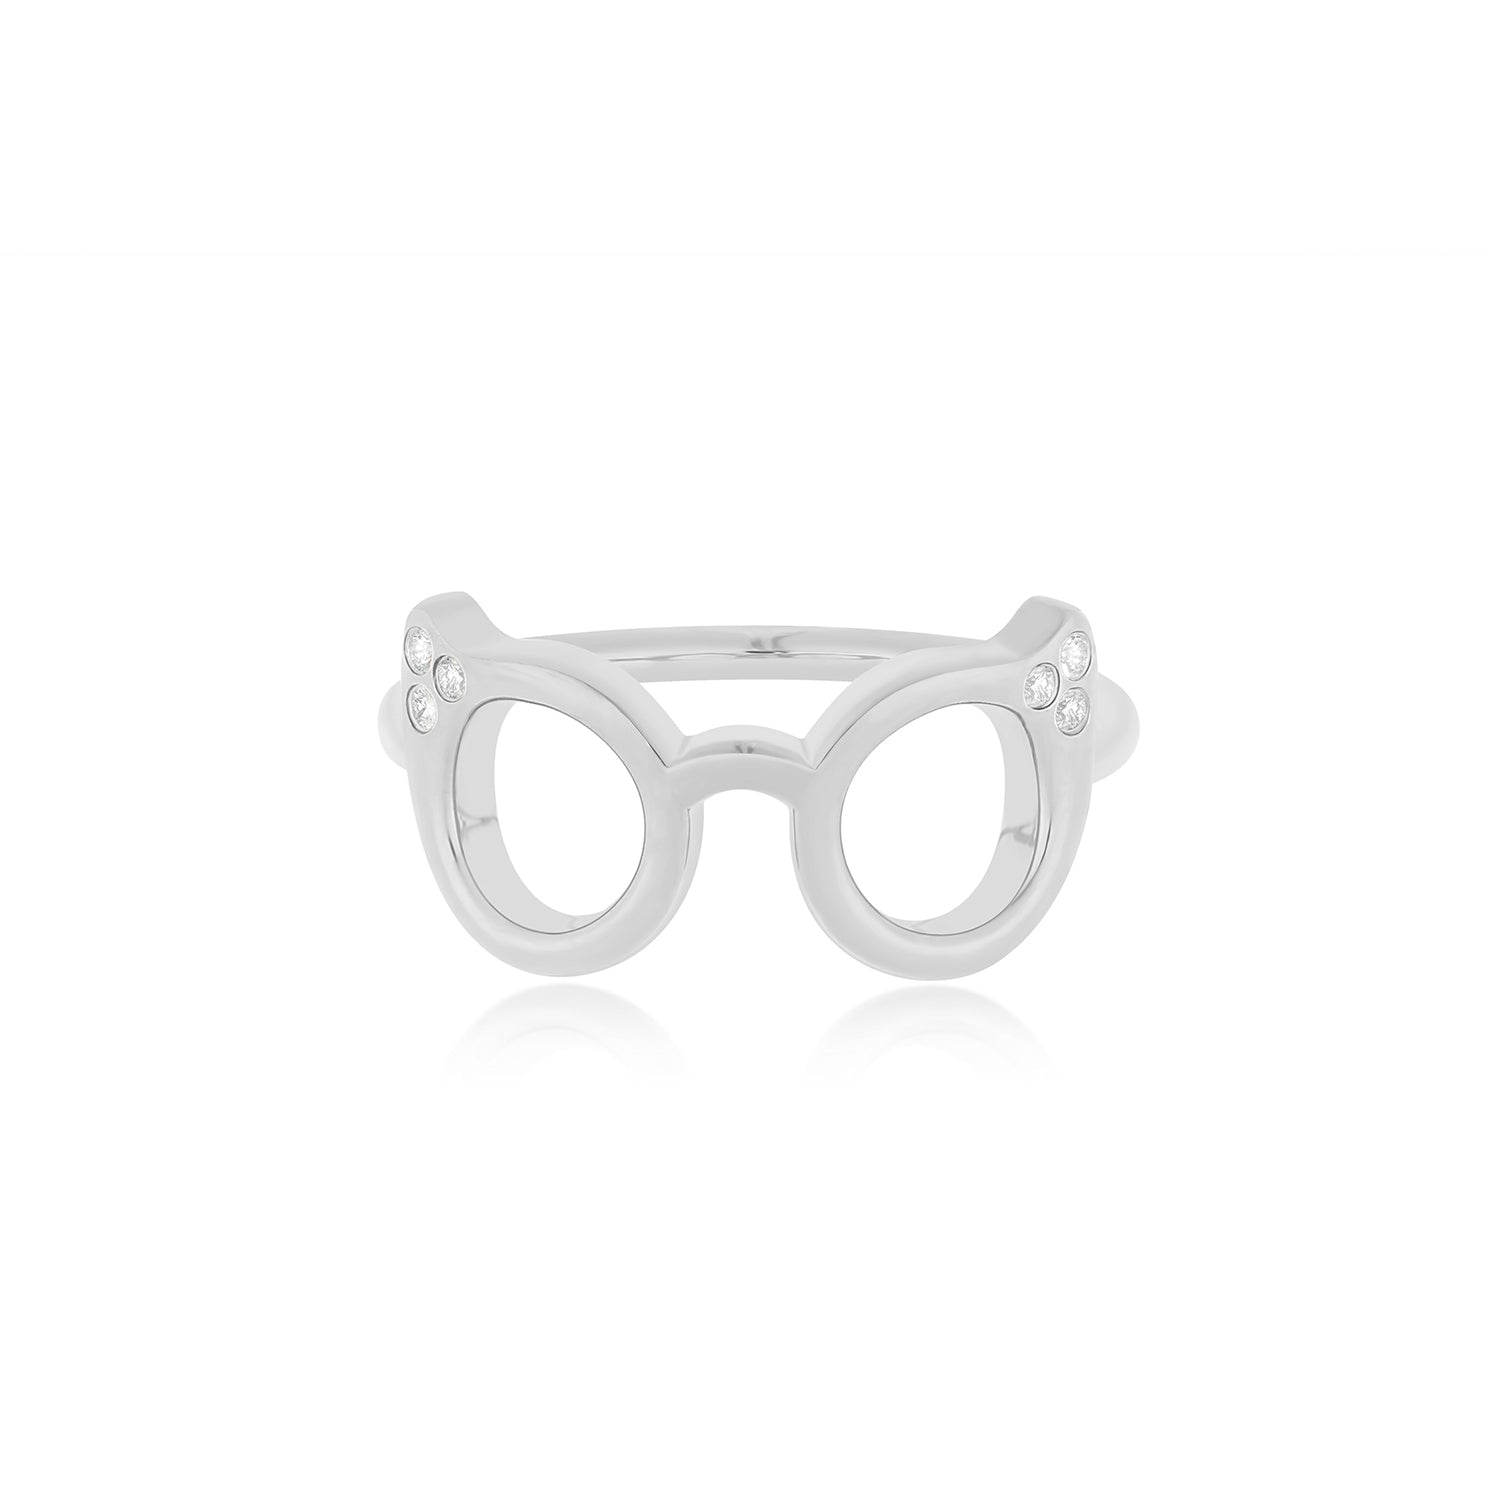 Evan's Sunnies Ring with Diamonds in 14k white gold